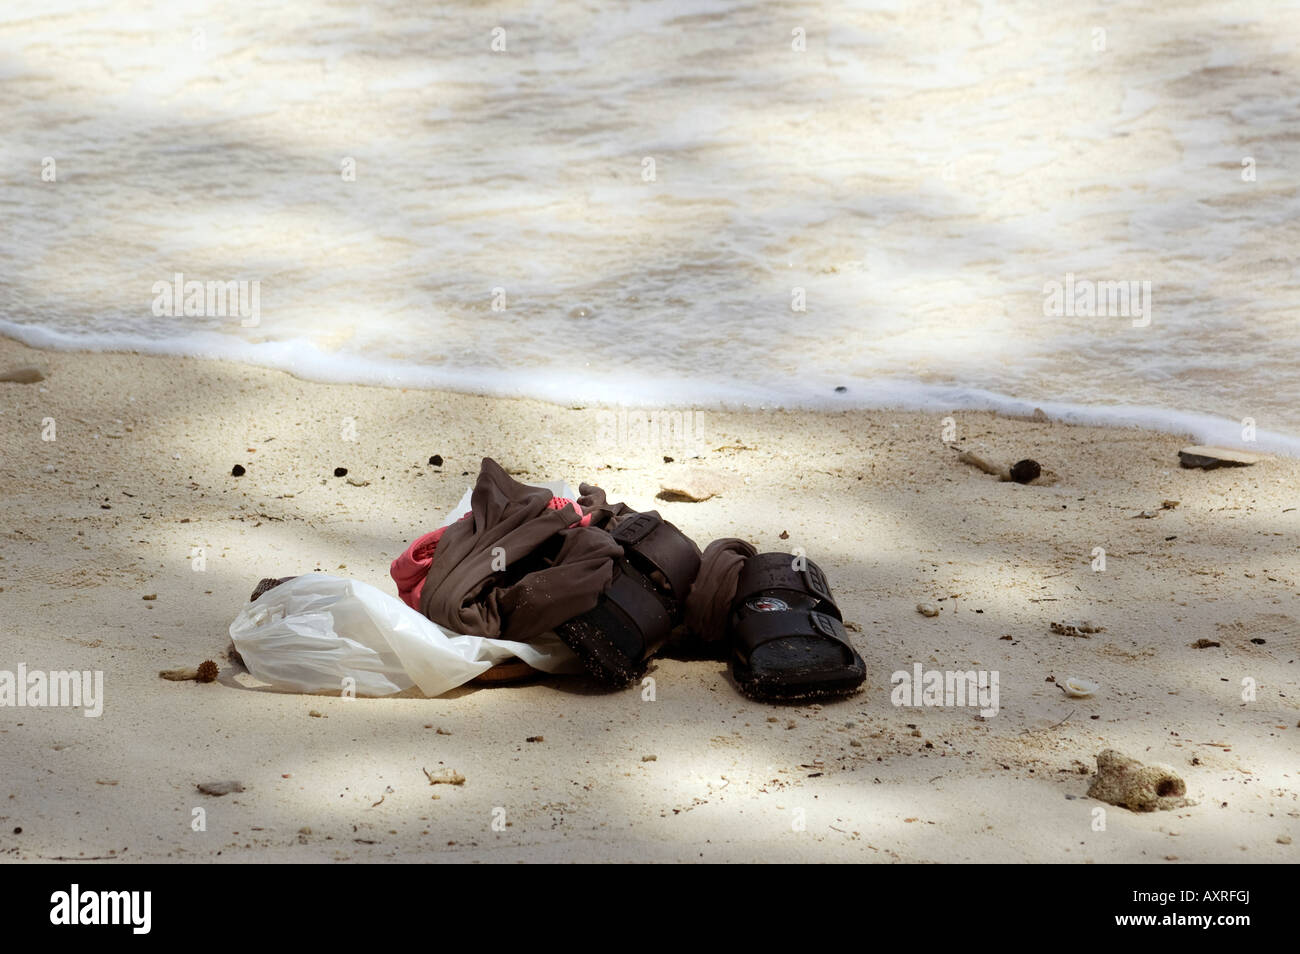 Shoes and clothes left on the beach of Sepa Island near the water Stock Photo